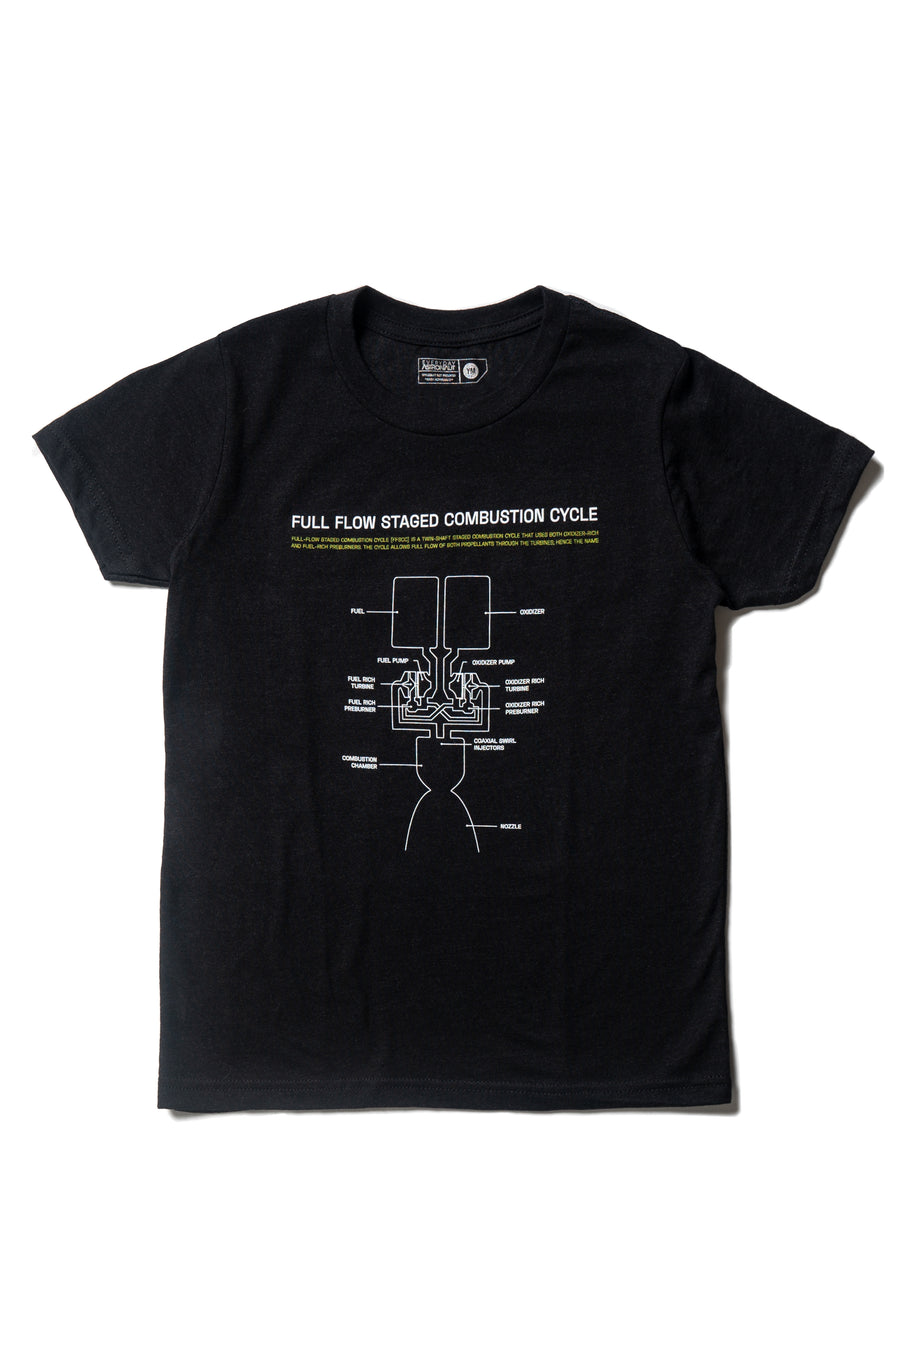 Full Flow Staged Combustion Cycle Youth Tee